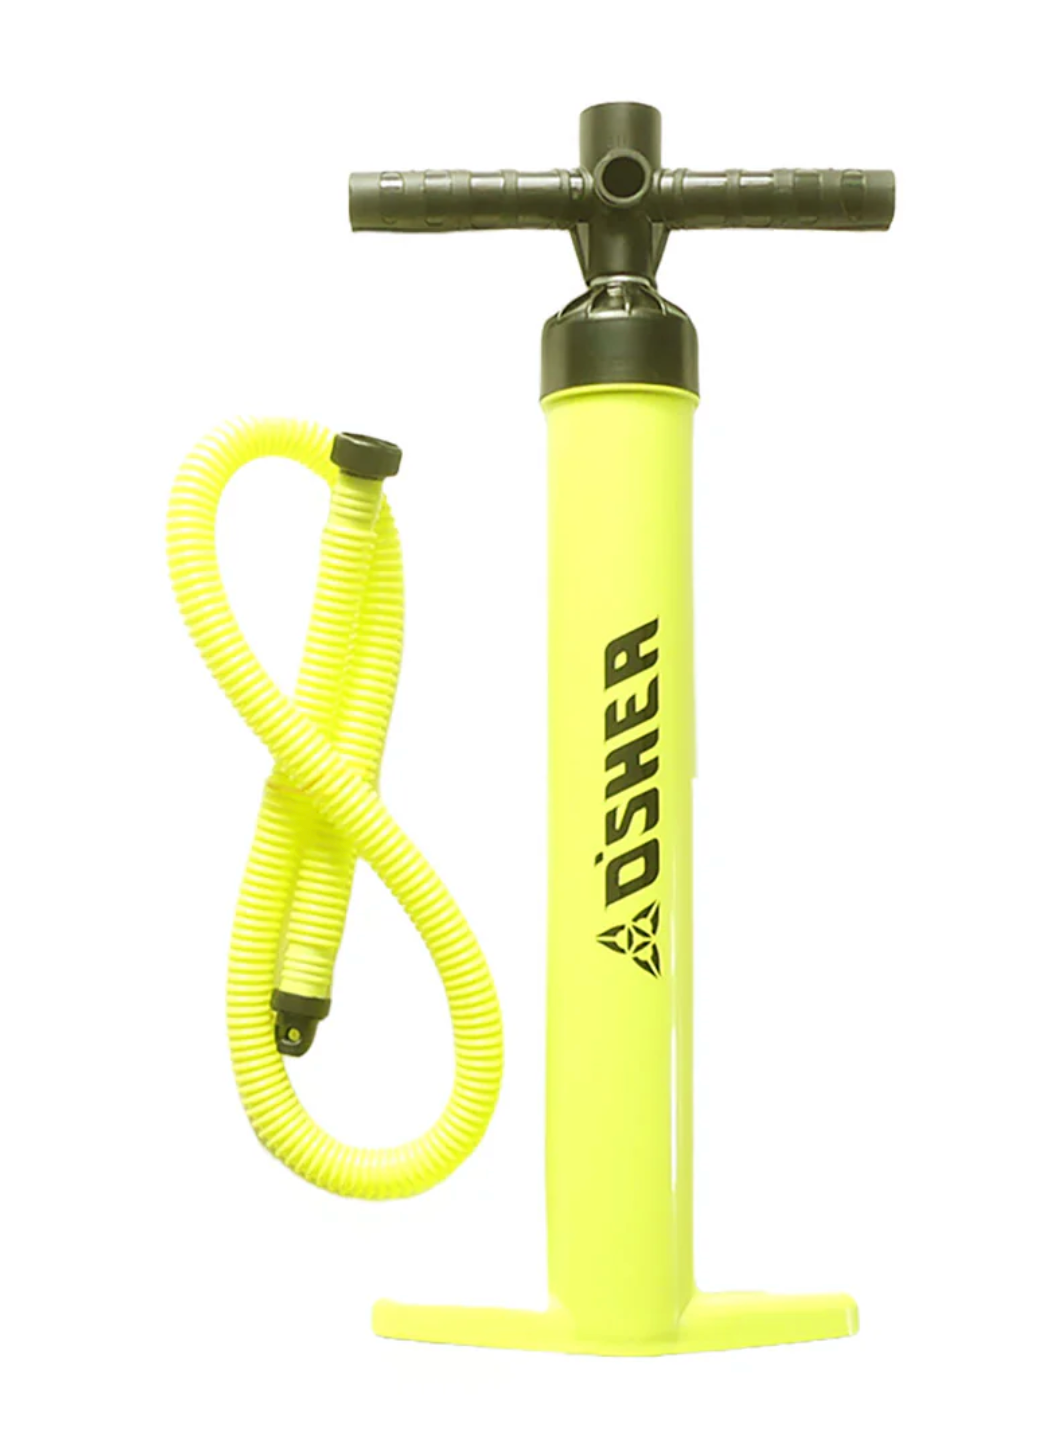 THE O'SHEA HP2 DOUBLE ACTION SUP POWER PUMP